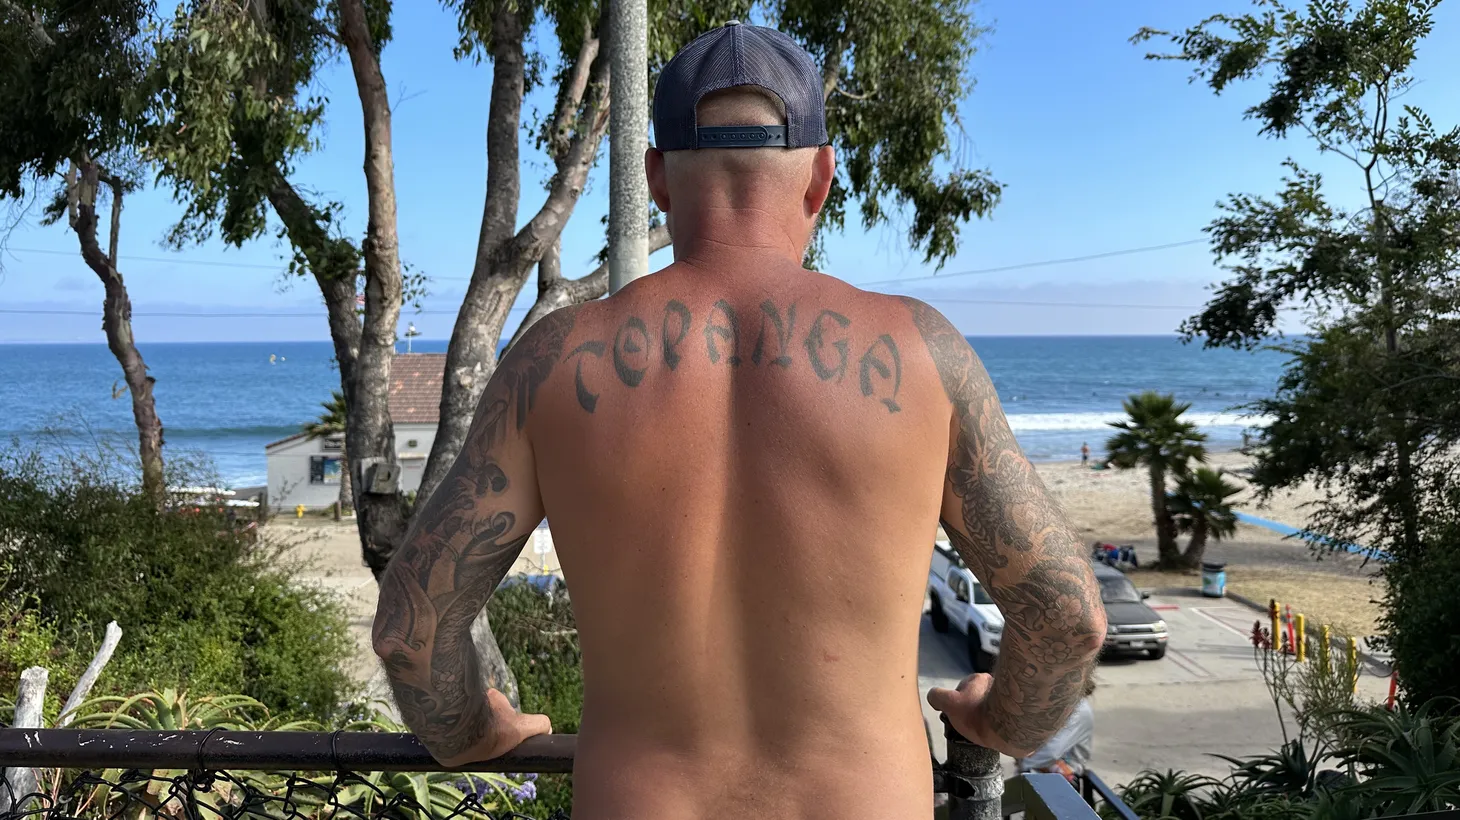 Topanga Beach has a “locals only” reputation that’s earned it the nickname “Topangry.”